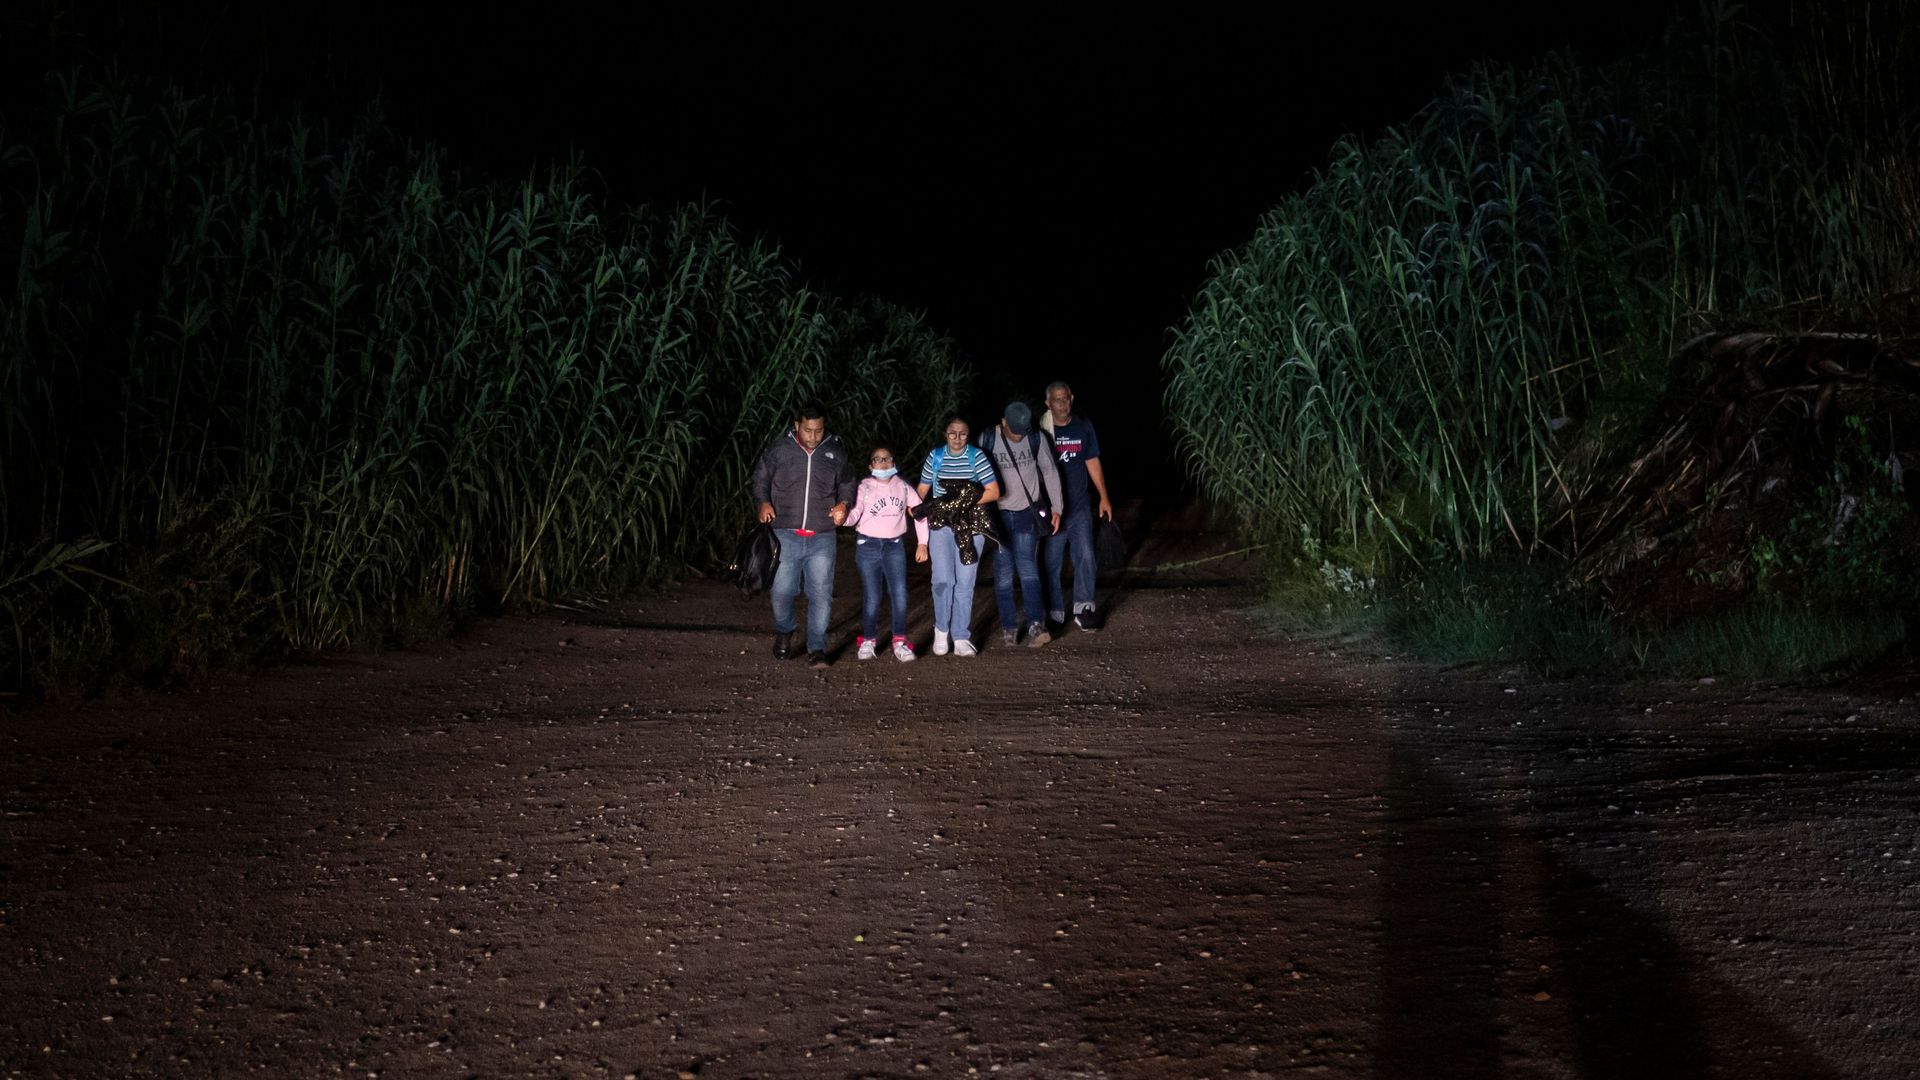 Picture taken at night of a family in the middle of a field after having crossed the Rio Grande